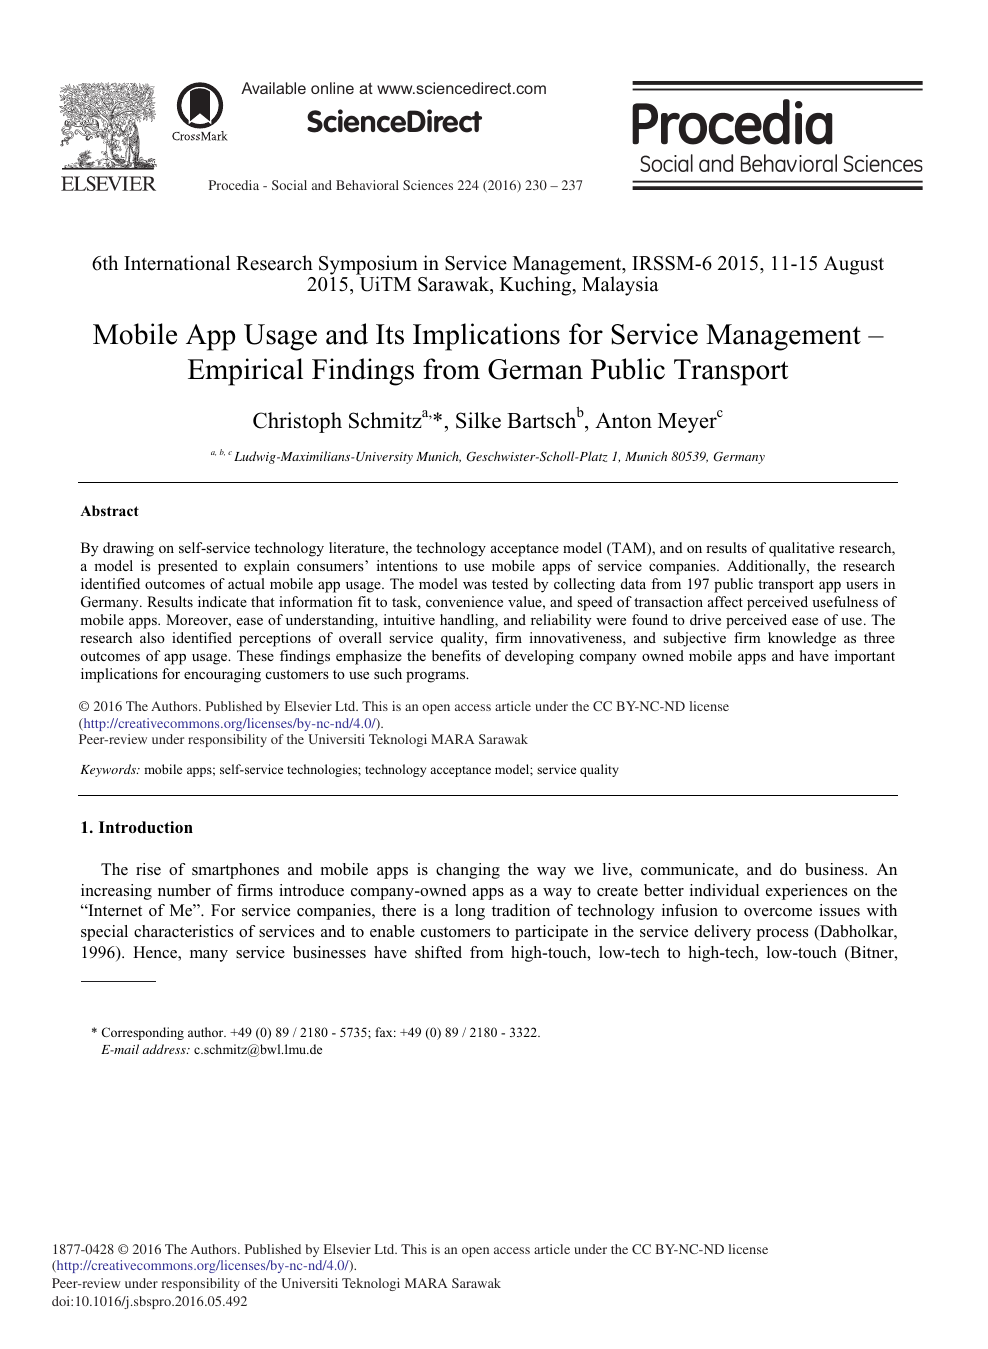 Mobile App Usage And Its Implications For Service Management Empirical Findings From German Public Transport Topic Of Research Paper In Economics And Business Download Scholarly Article Pdf And Read For